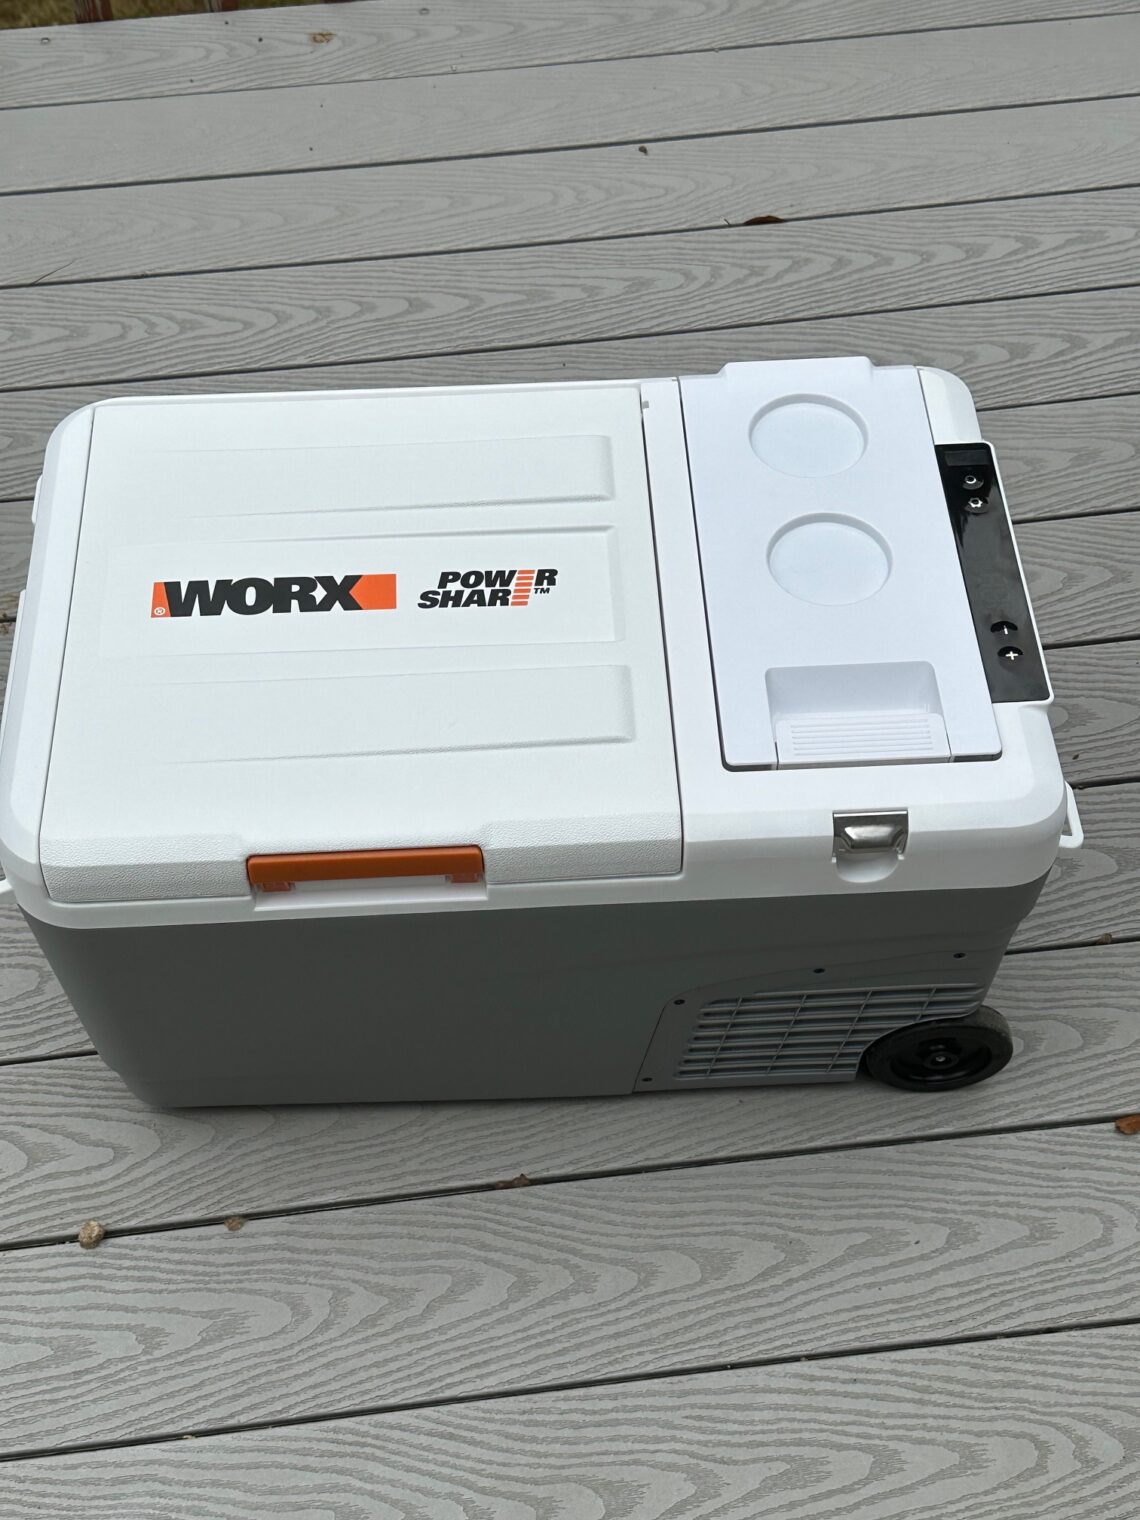 Check the Battery Operated 20V Worx Cooler Review